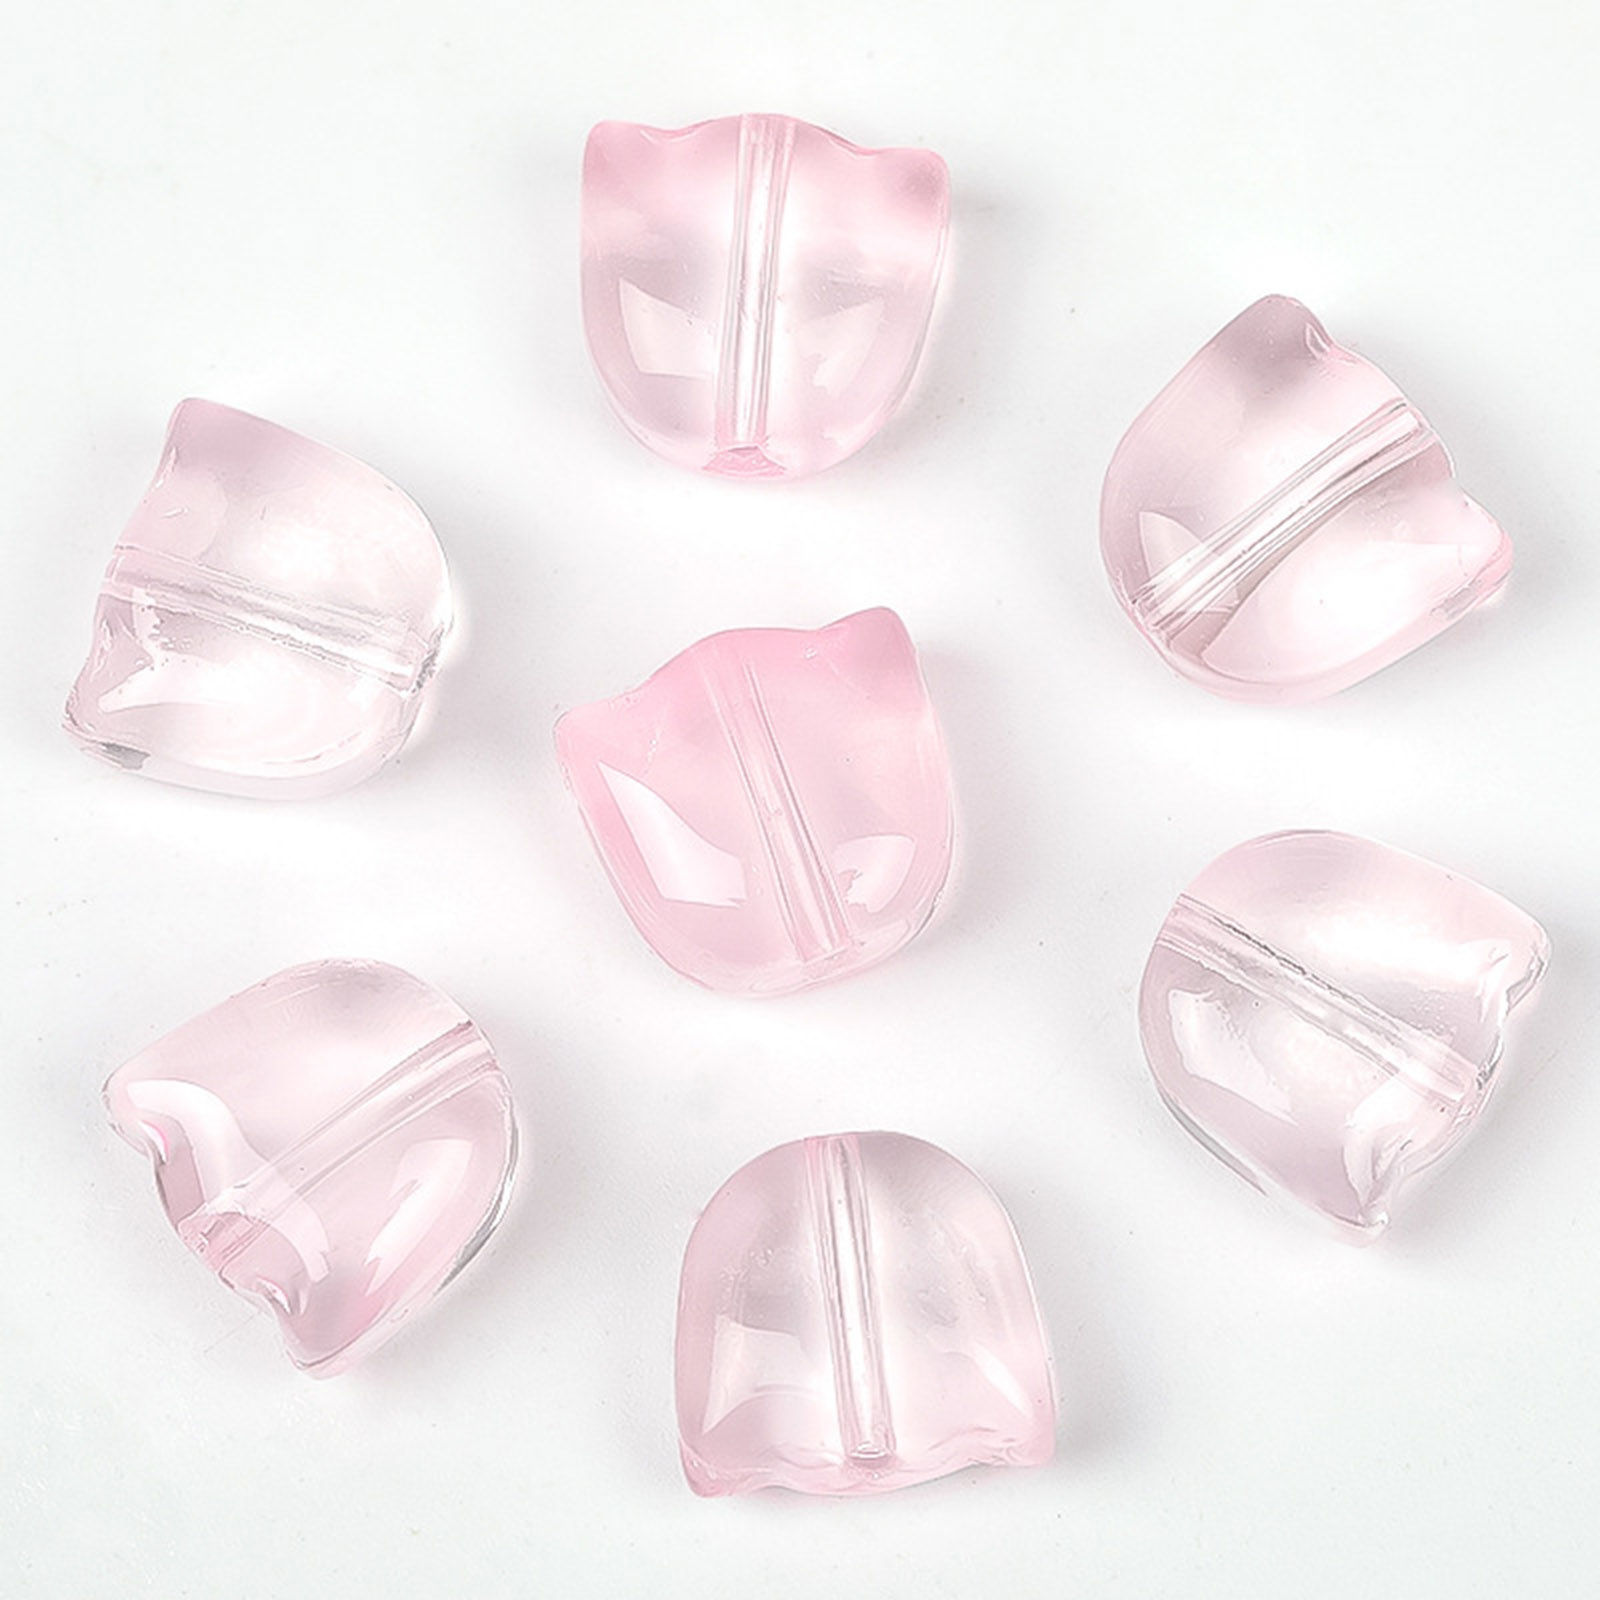 Picture of Lampwork Glass Beads Tulip Flower Light Pink Gradient Color About 9mm x 8.8mm, Hole: Approx 1.1mm, 20 PCs